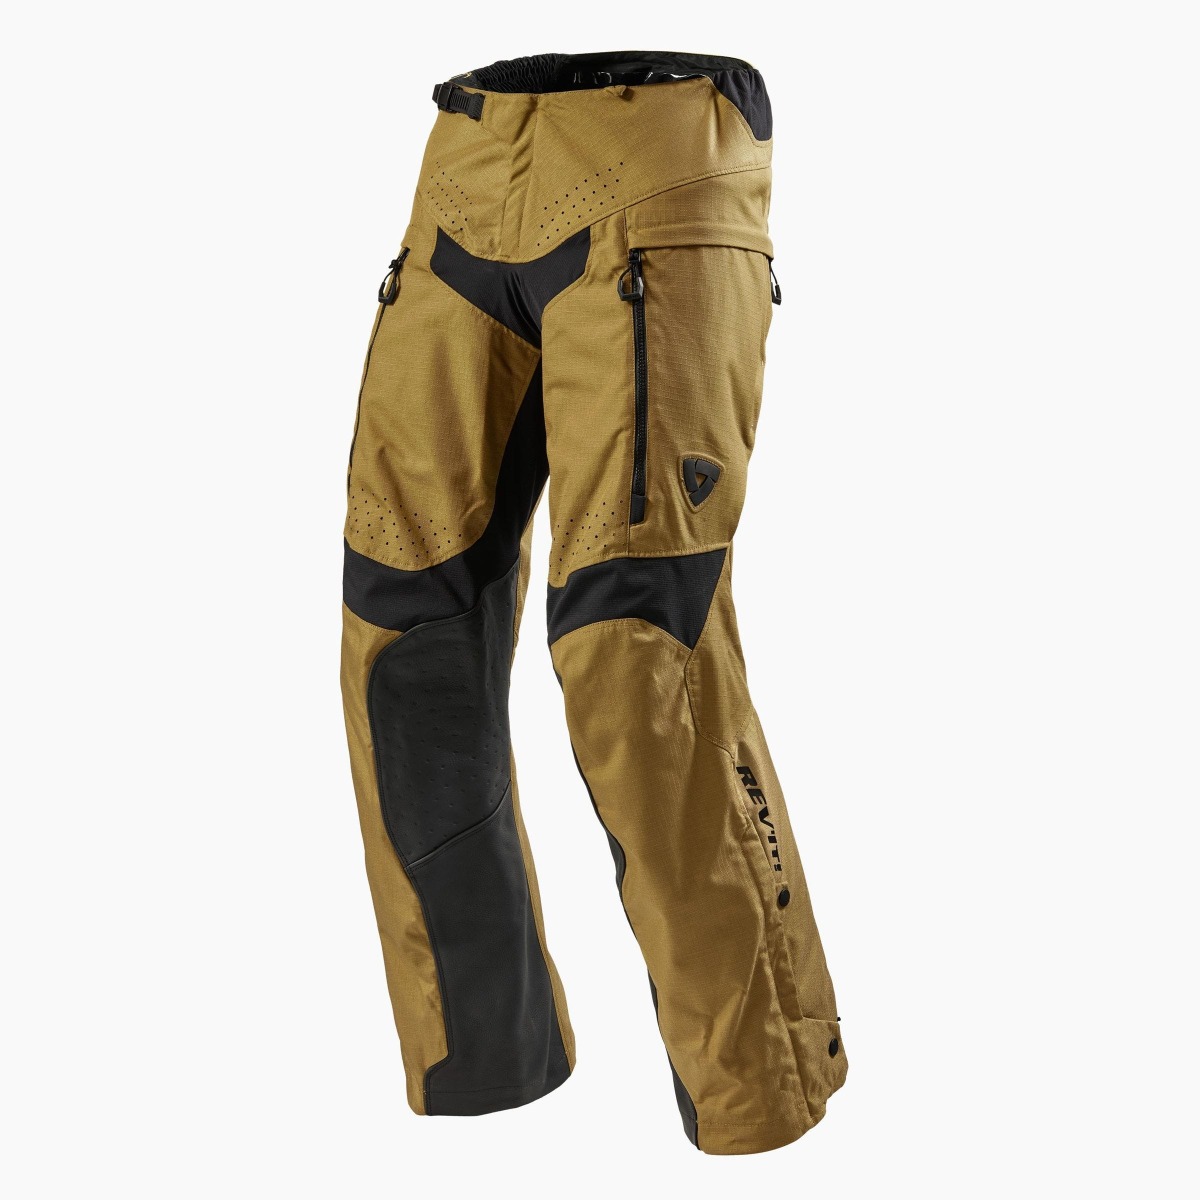 Image of REV'IT! Continent Ocher Yellow Motorcycle Pants Size XL ID 8700001297202